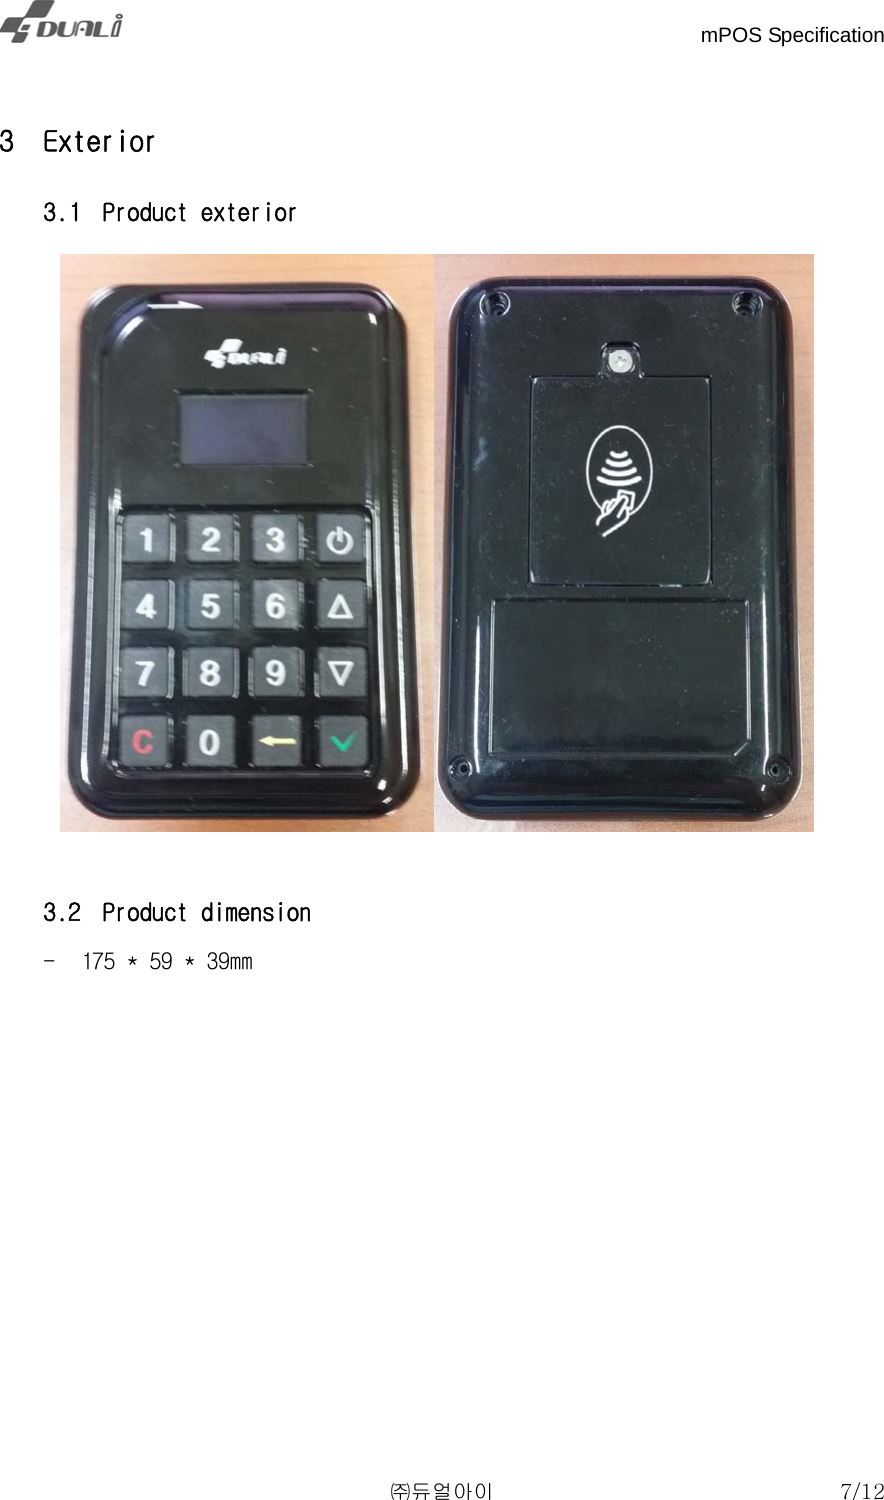    mPOS Specification   ㈜듀얼아이  7/12  3 Exterior  3.1 Product exterior   3.2 Product dimension - 175 * 59 * 39mm 